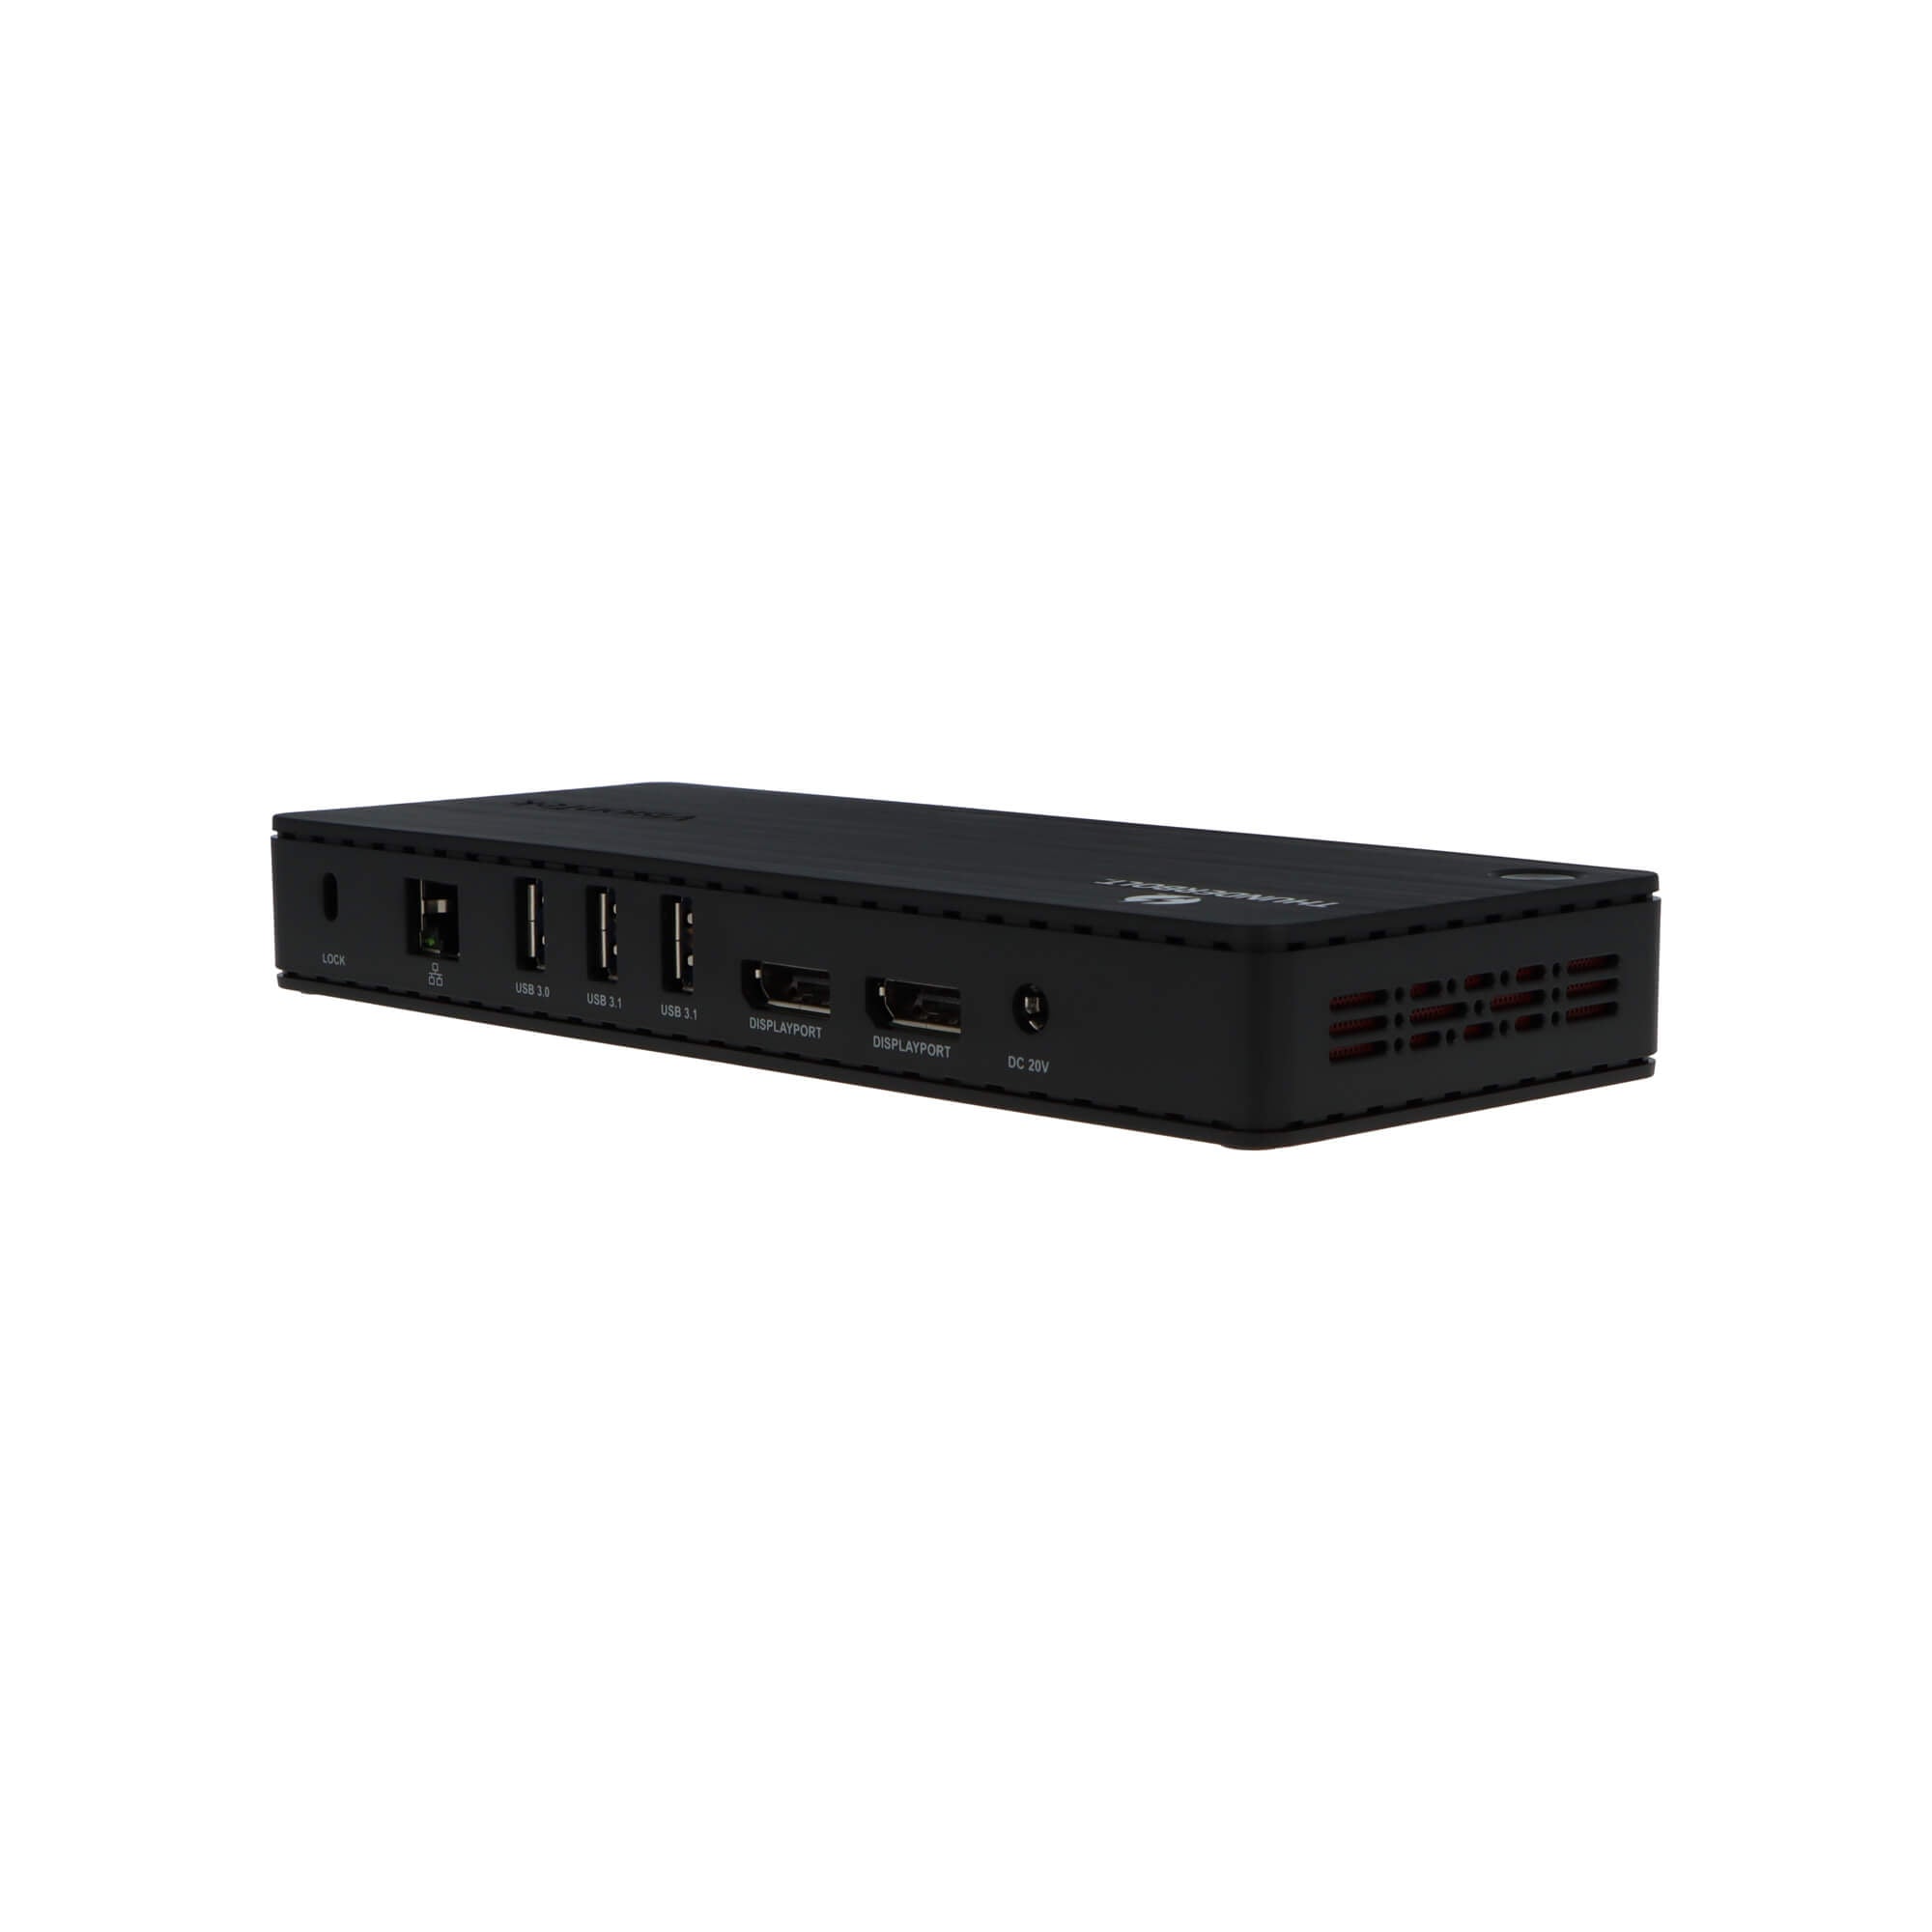 VT4800 - Dual Display Thunderbolt 3 / USB-C Docking Station with 60W Power Delivery